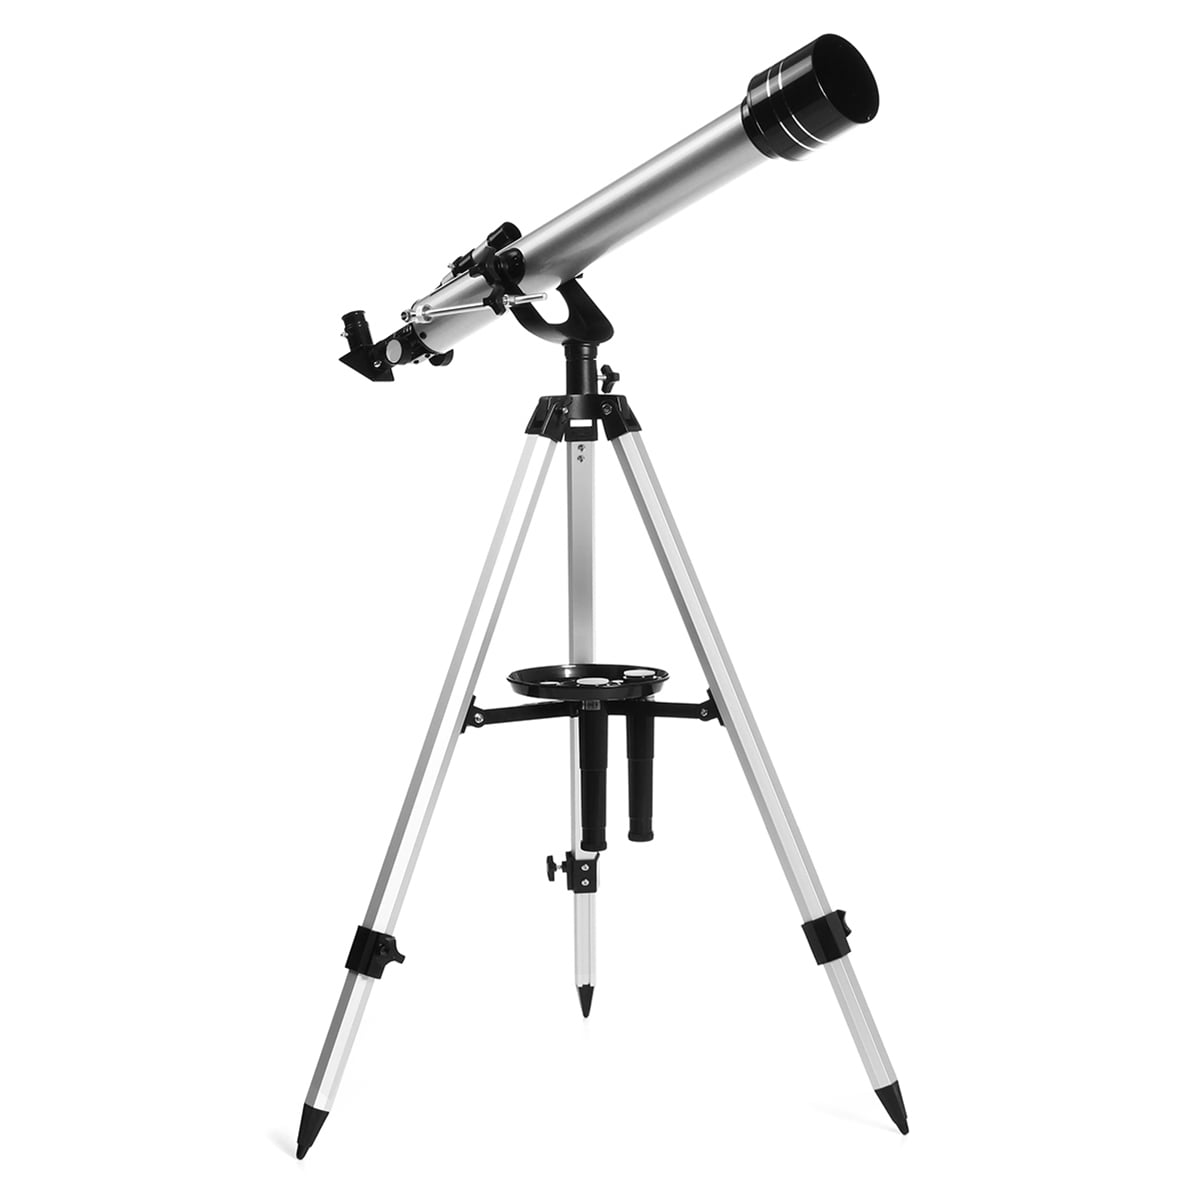 Telescope for Beginners and Kids-60mm Apeture 700mm Focus Length Telescope Refractor & Travel Scope to Observe Moon and Planet with Tripod and 10mm Eyepiece Smartphone Mount 